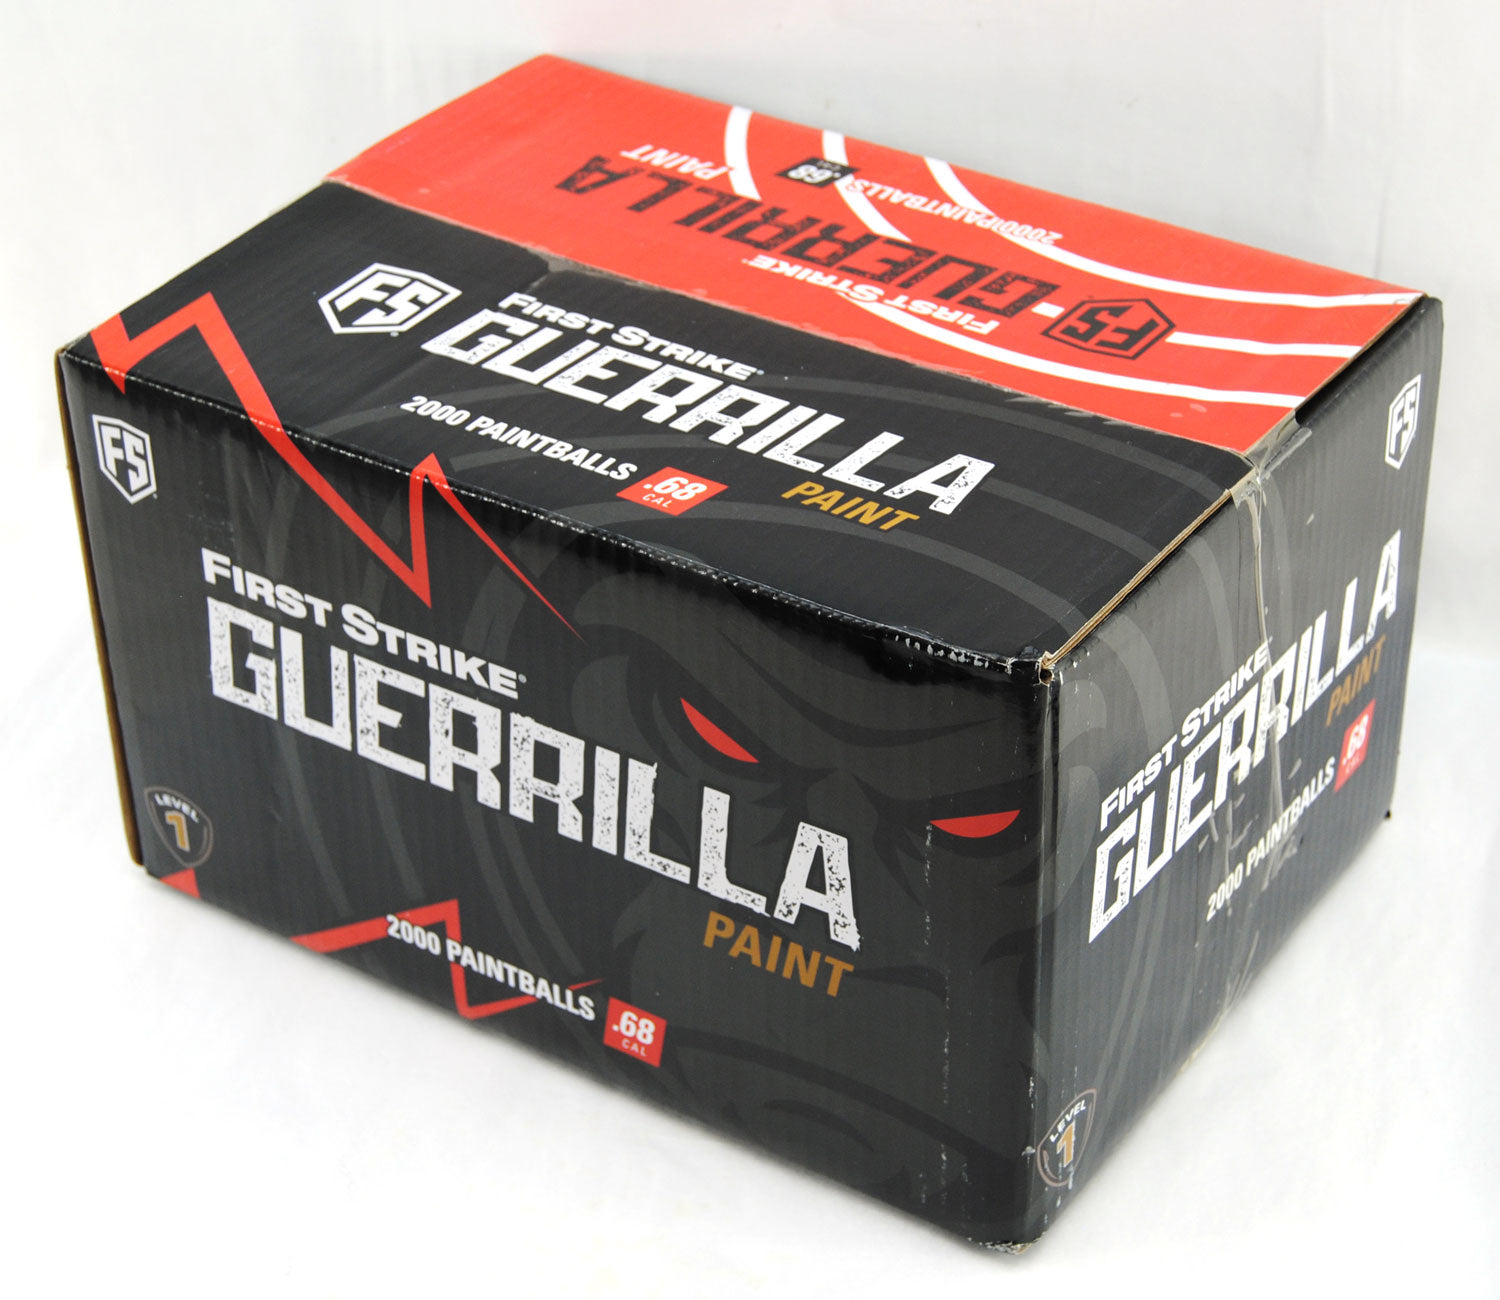 First Strike Guerrilla Paintballs 2000 Count Box - Yellow Shell / Yellow Fill - First Strike